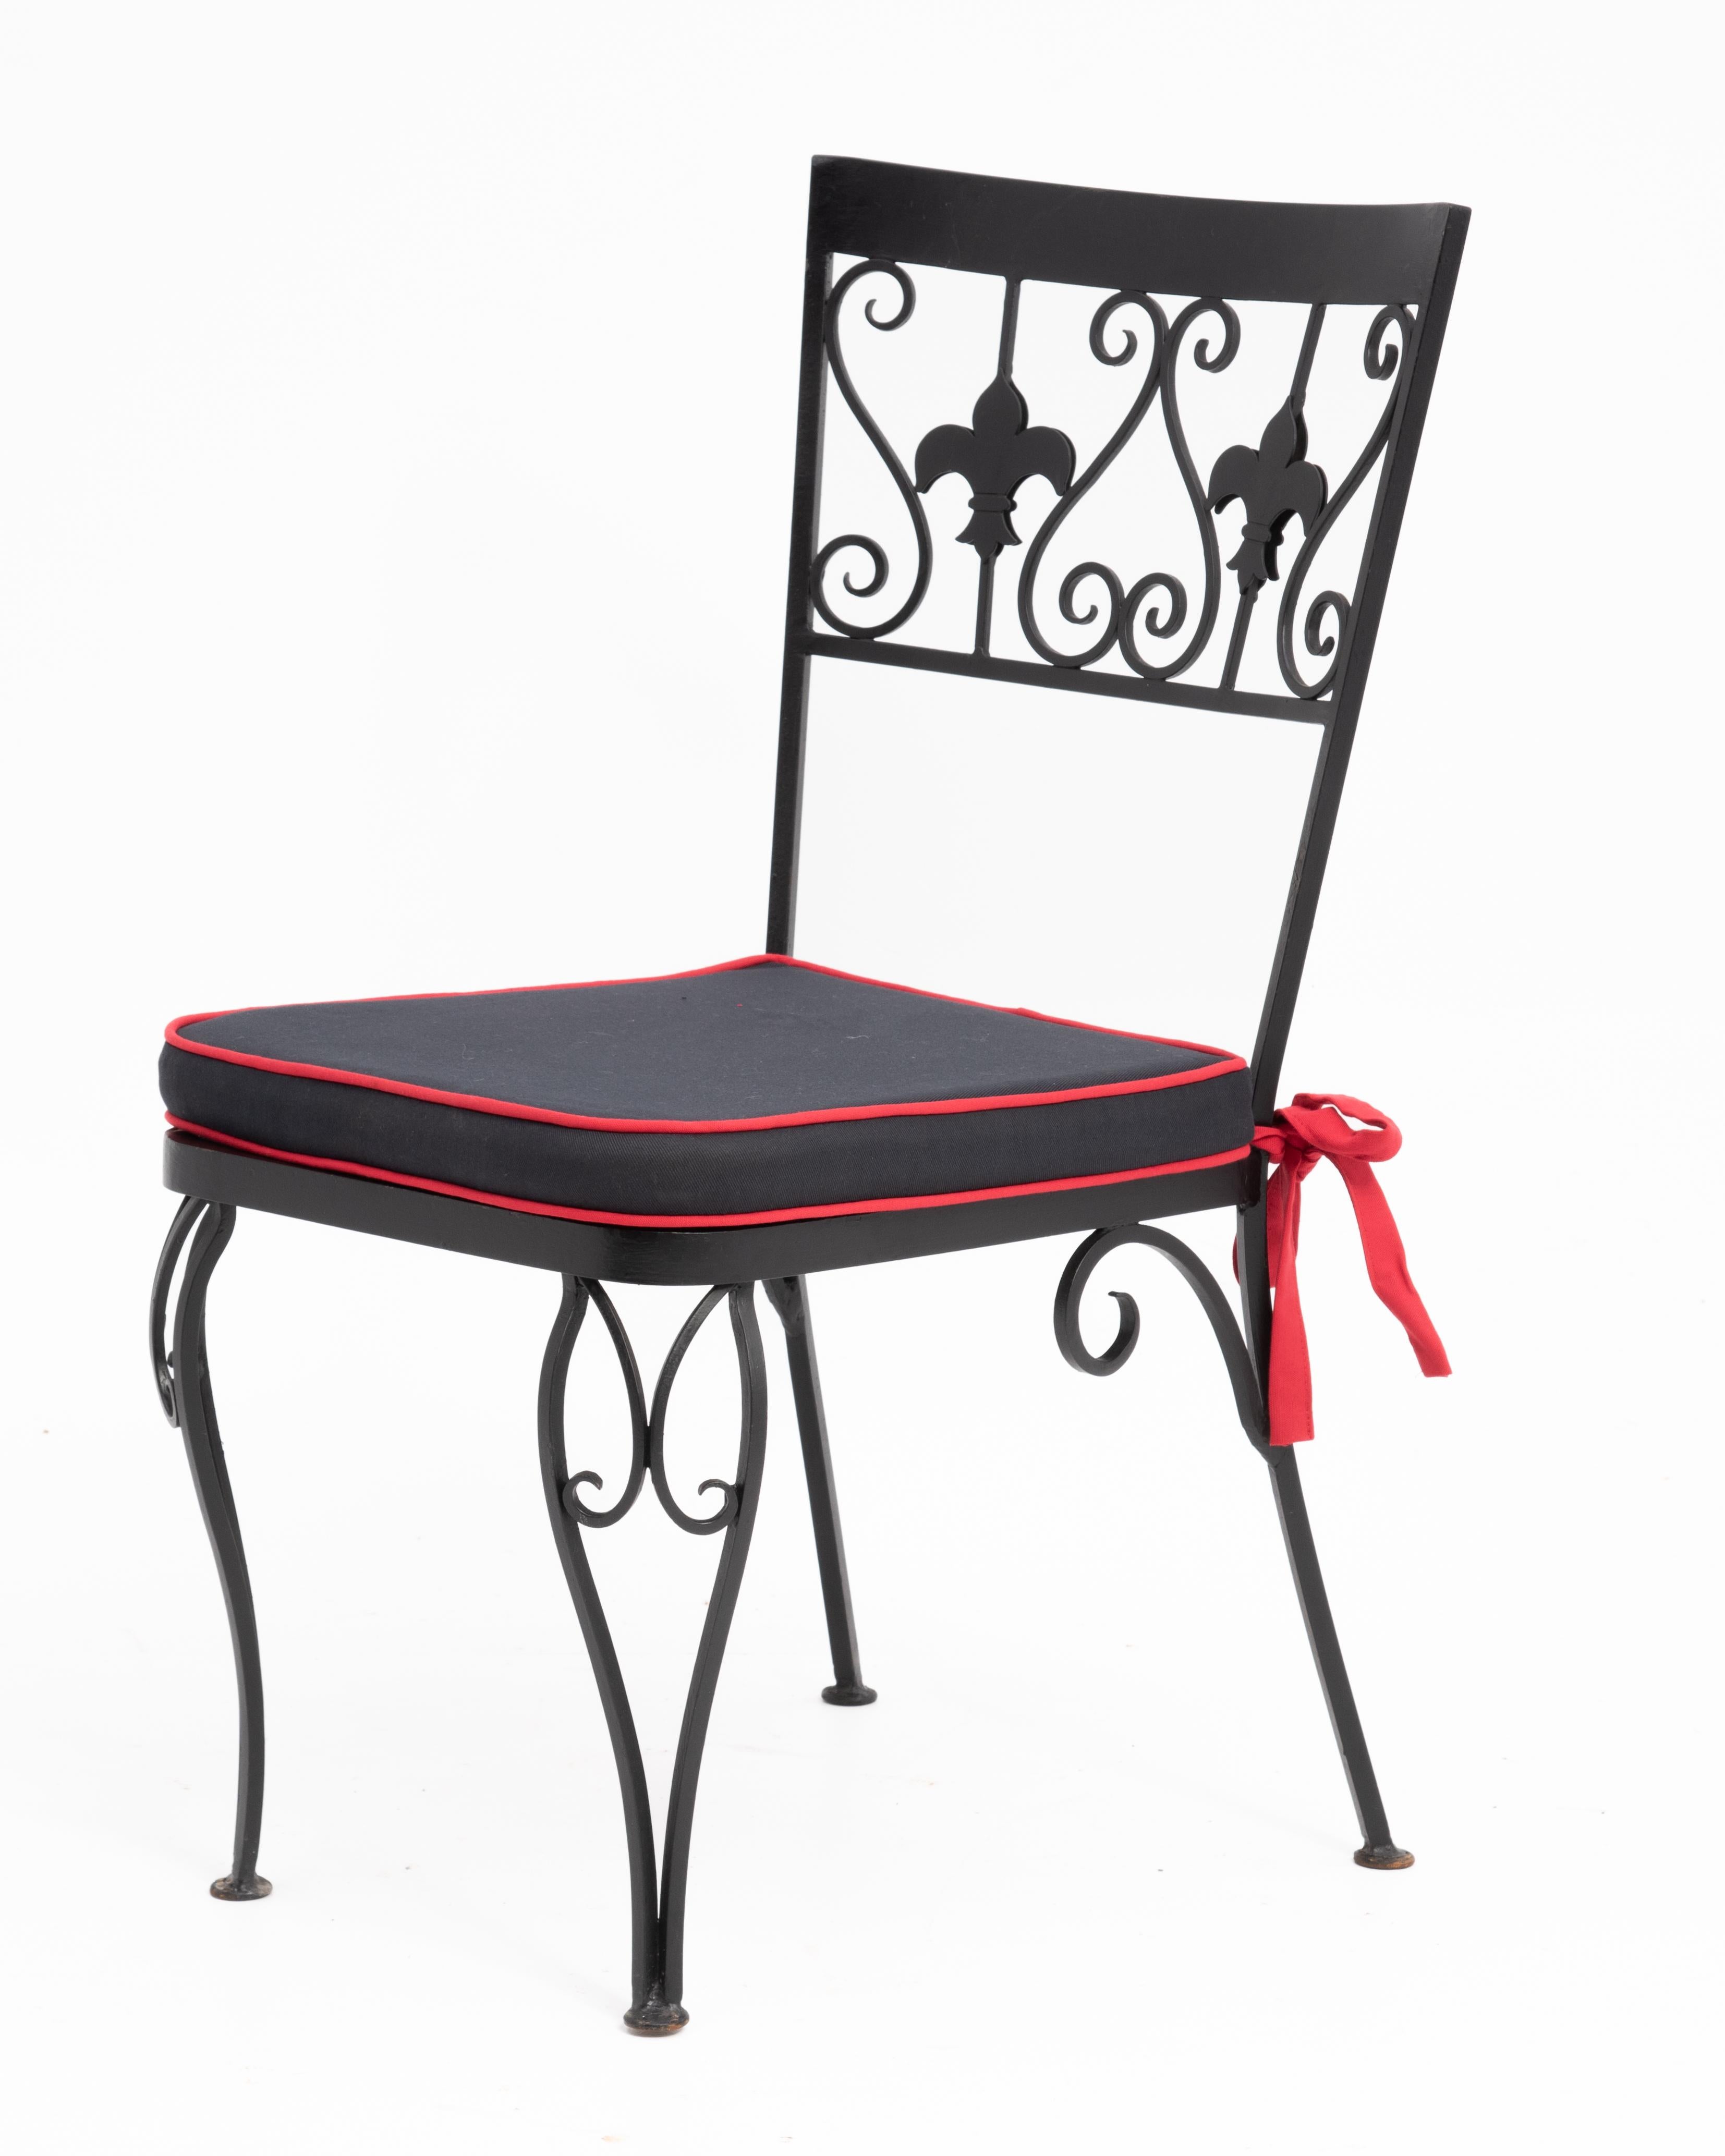 Hollywood Regency Wrought Iron Fleur-De-Lis Dining Chairs 1960s - a Set of 6 For Sale 2